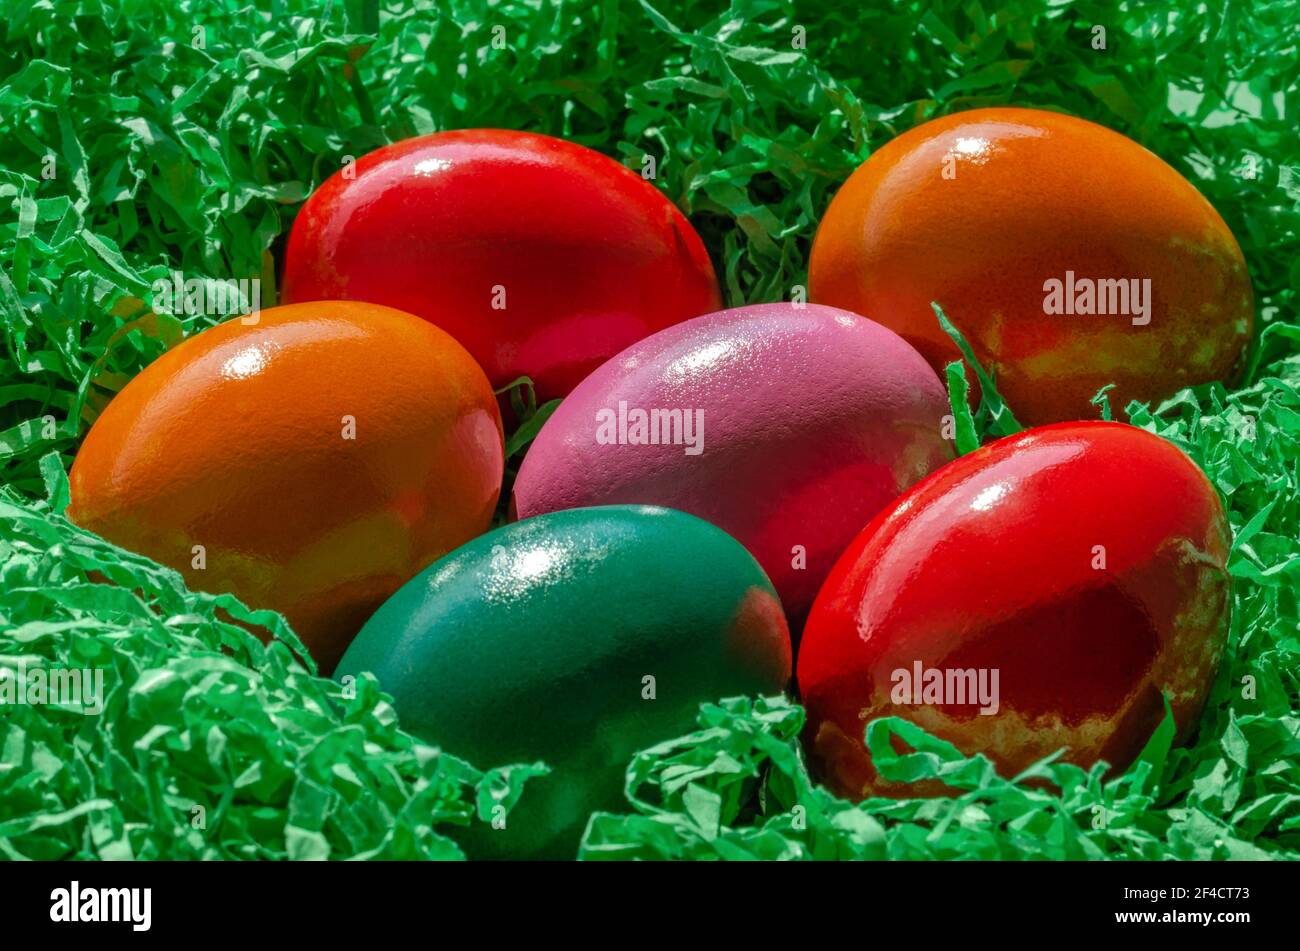 Easter eggs arranged in green paper nest. Group of multicolored Paschal eggs, dyed hard boiled chicken eggs, placed in green colored paper nest. Stock Photo